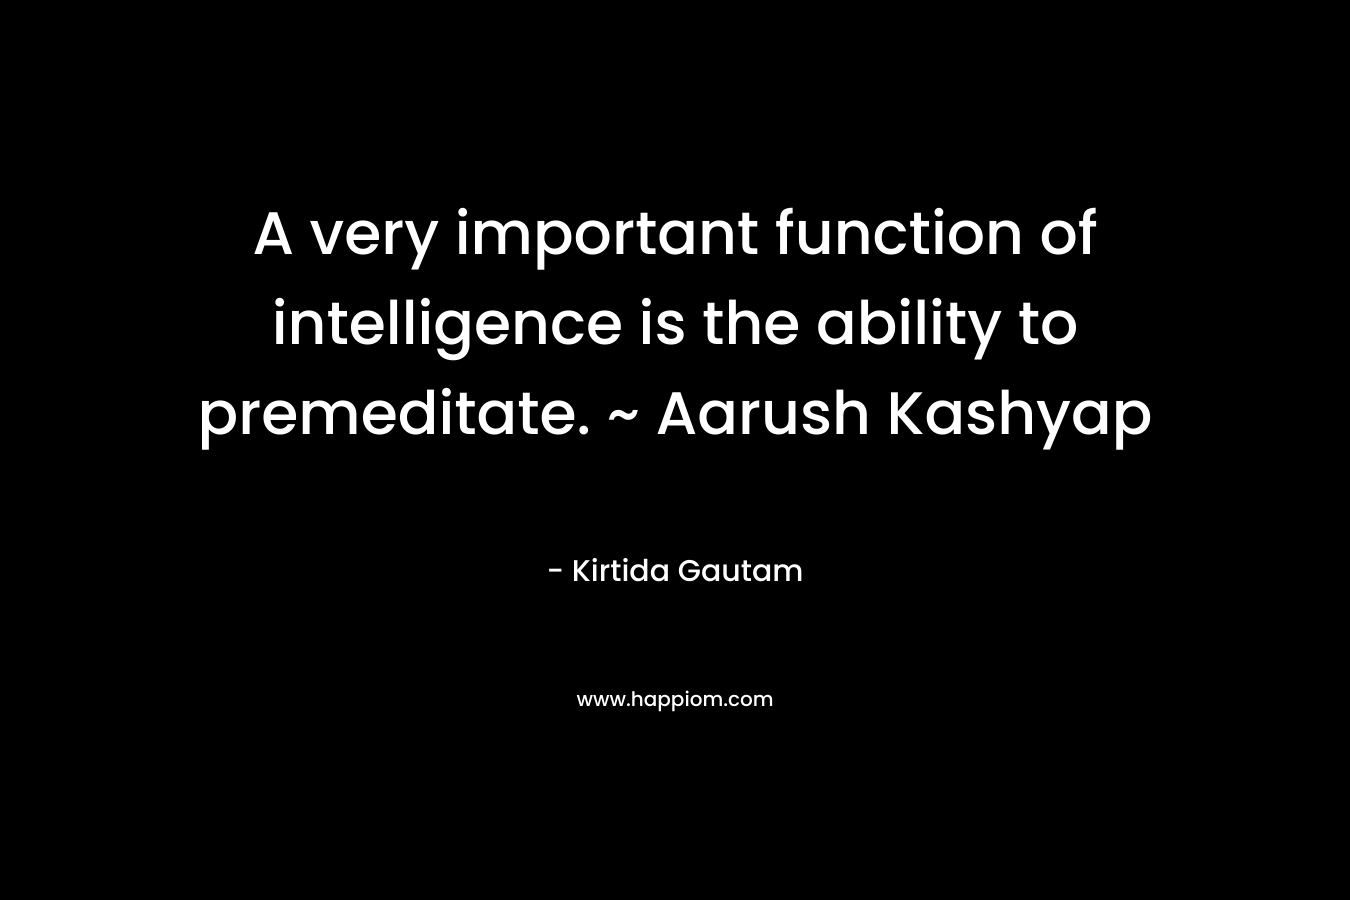 A very important function of intelligence is the ability to premeditate. ~ Aarush Kashyap